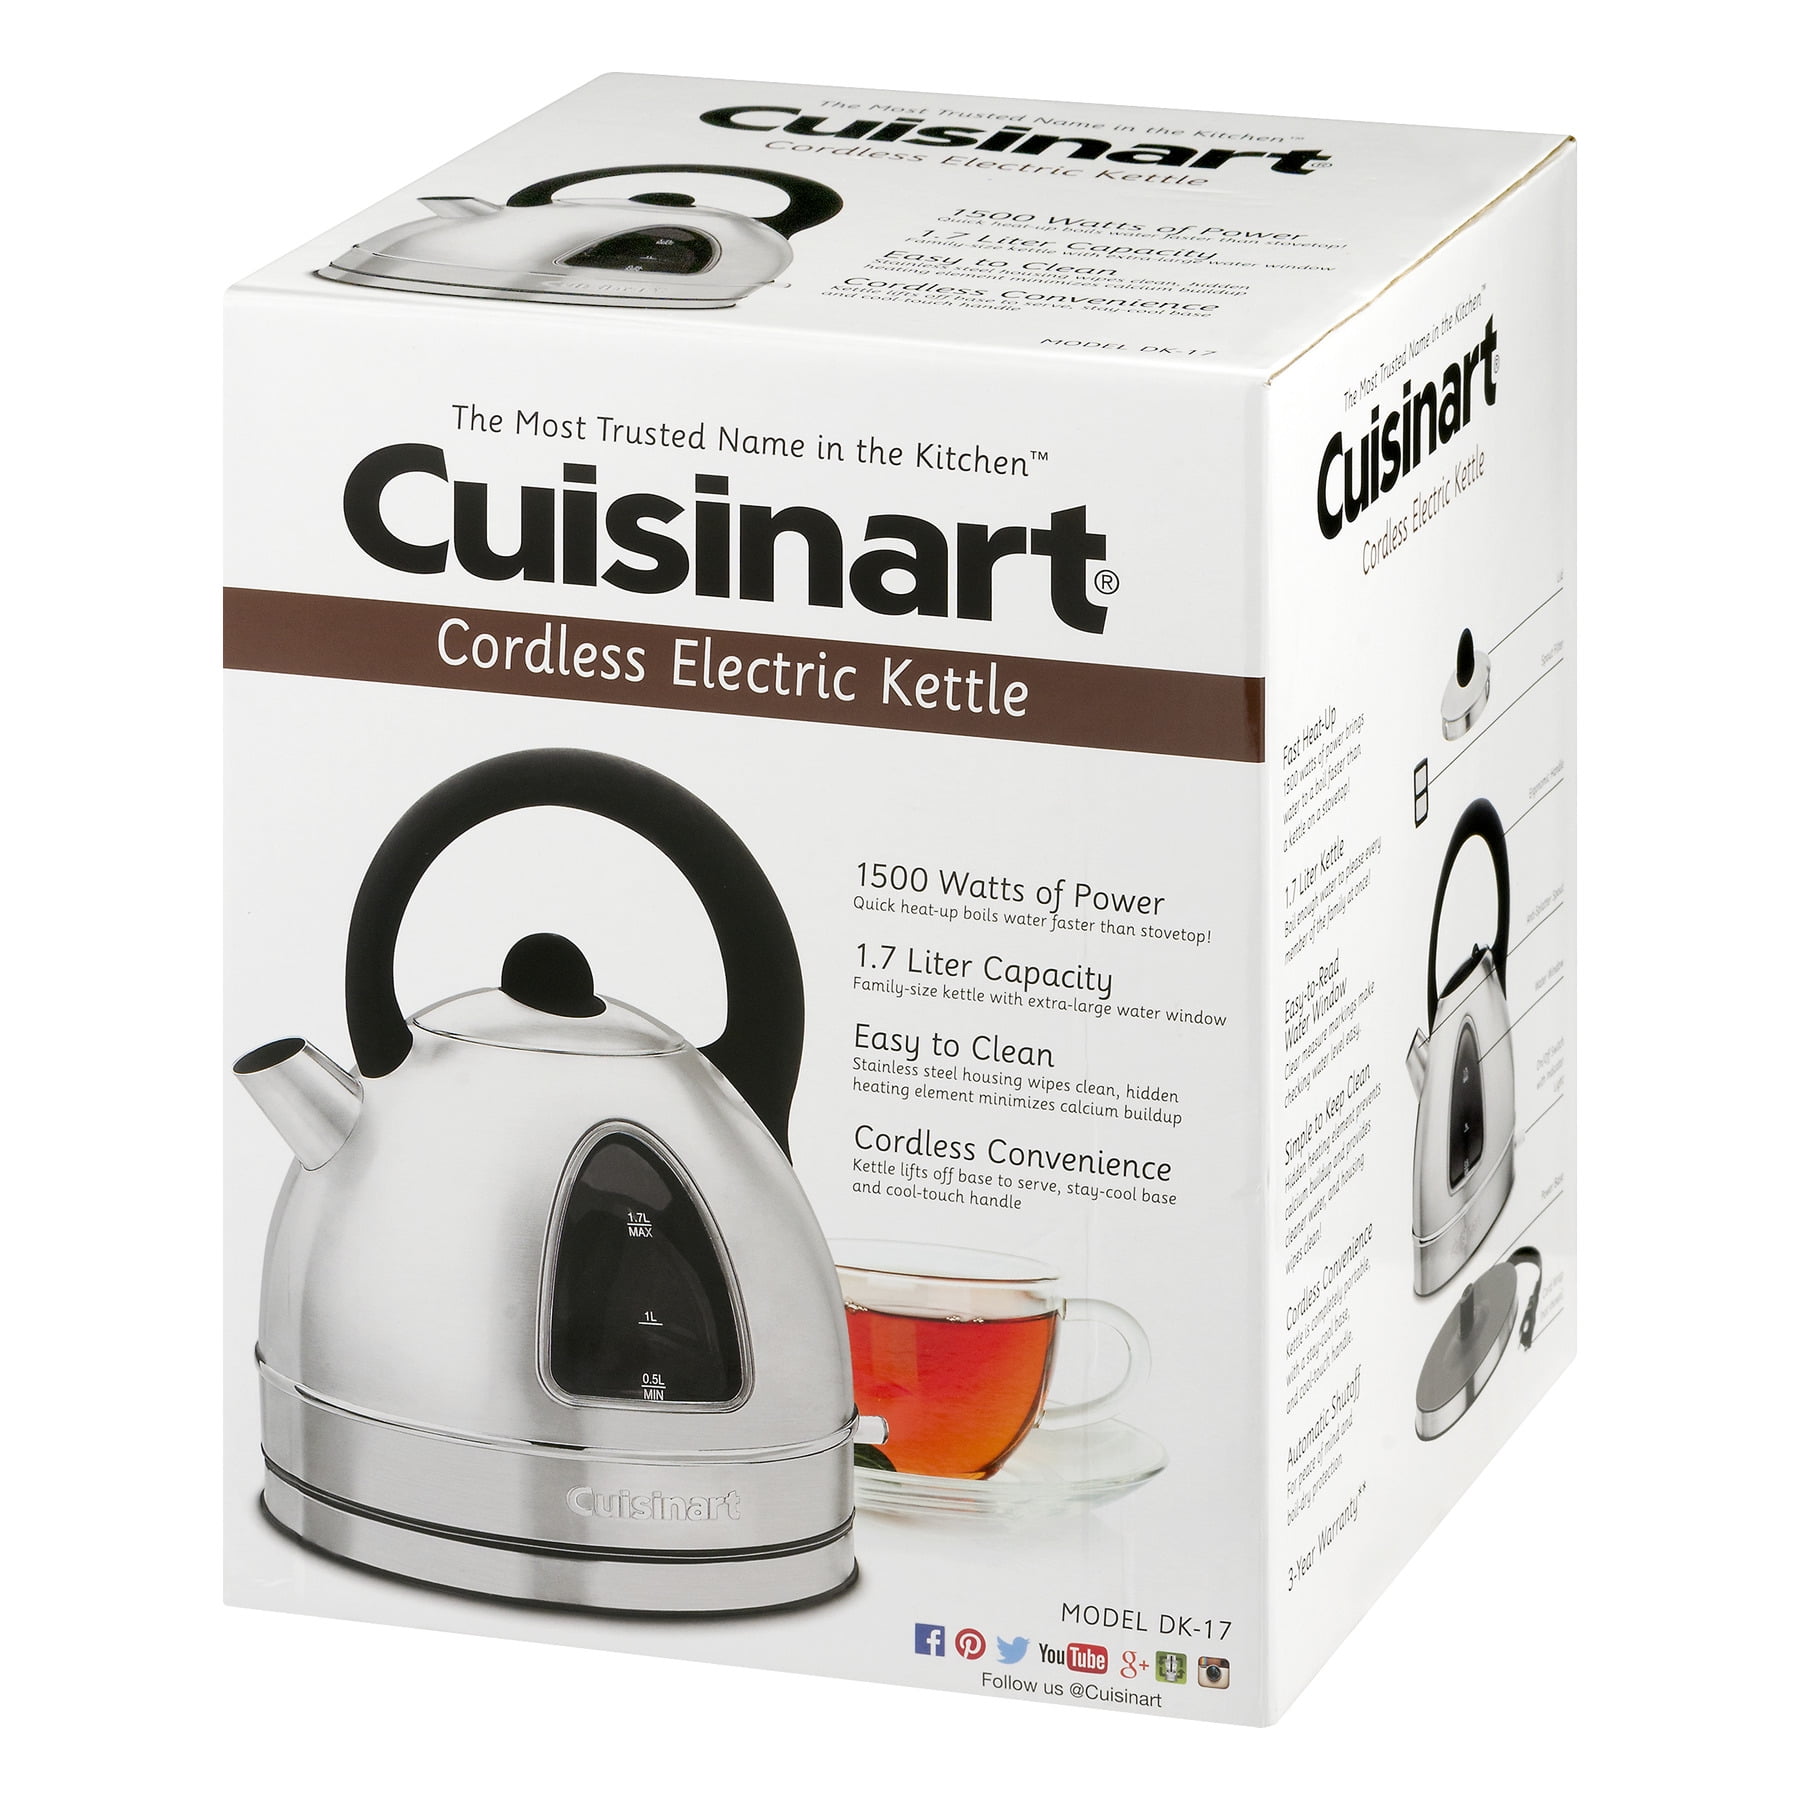 STAY by Cuisinart WCK170W White 1.7 Liter Electric Kettle - 120V